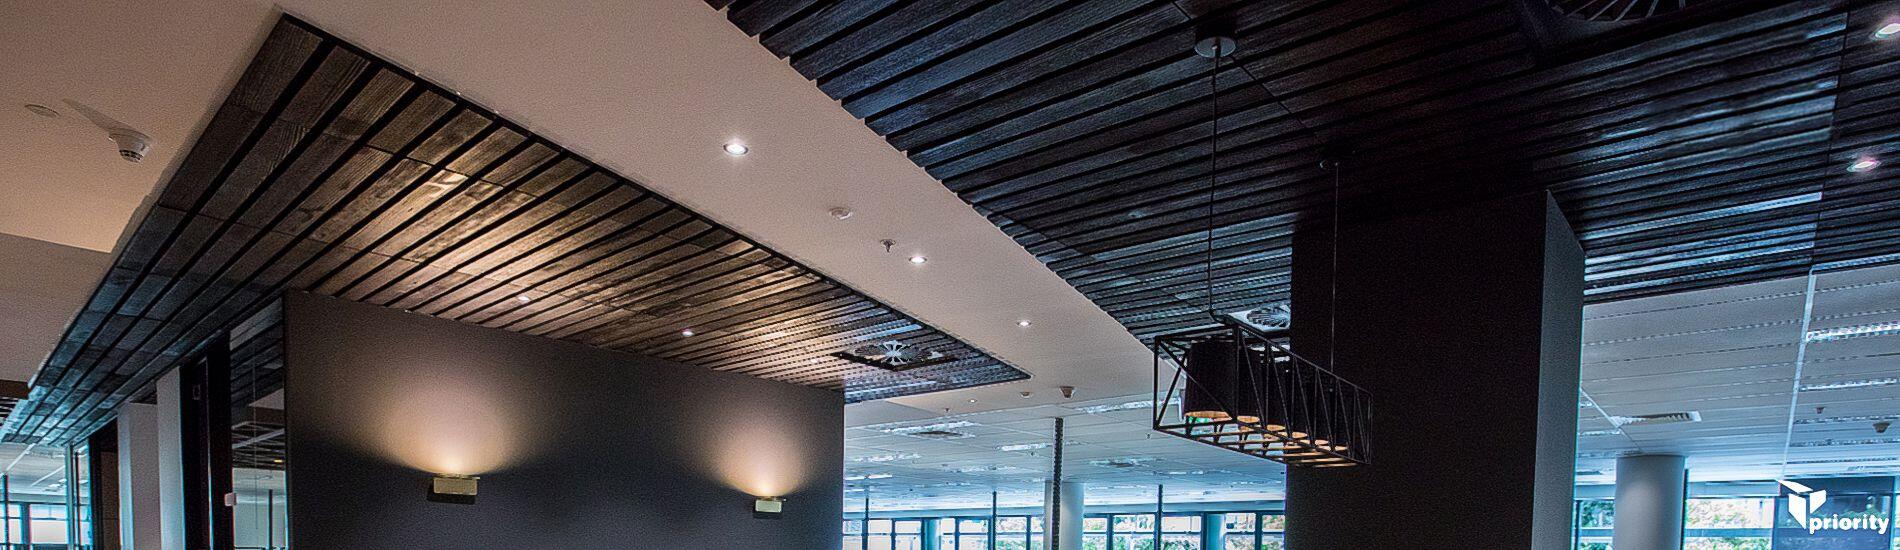 SUPATILE SLAT Ceiling Tiles in DRIFTWOOD Rustic Timber Throughout Workplace Spaces